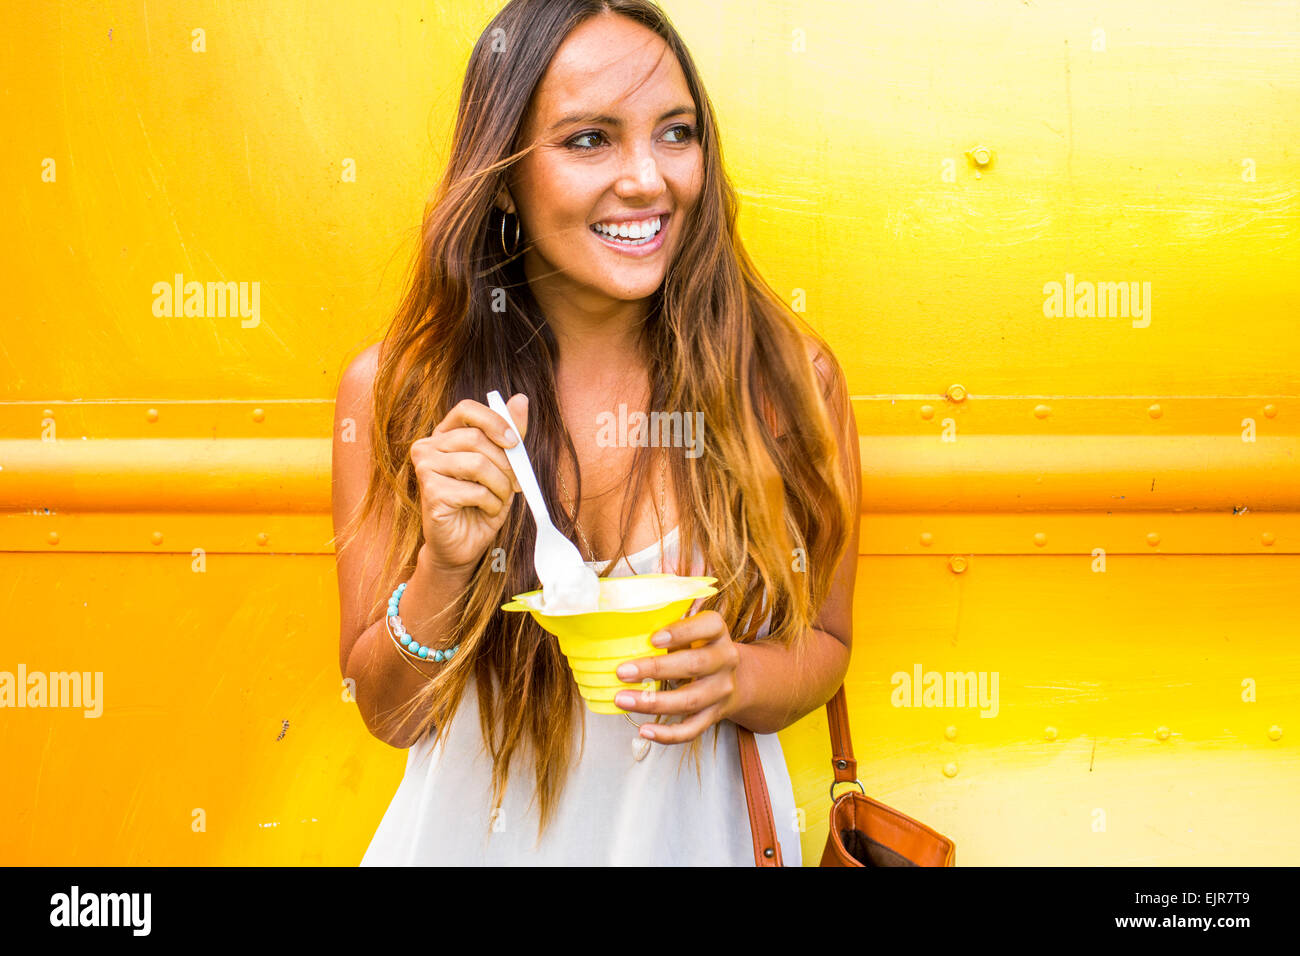 Caucasian woman eating shaved ice Stock Photo